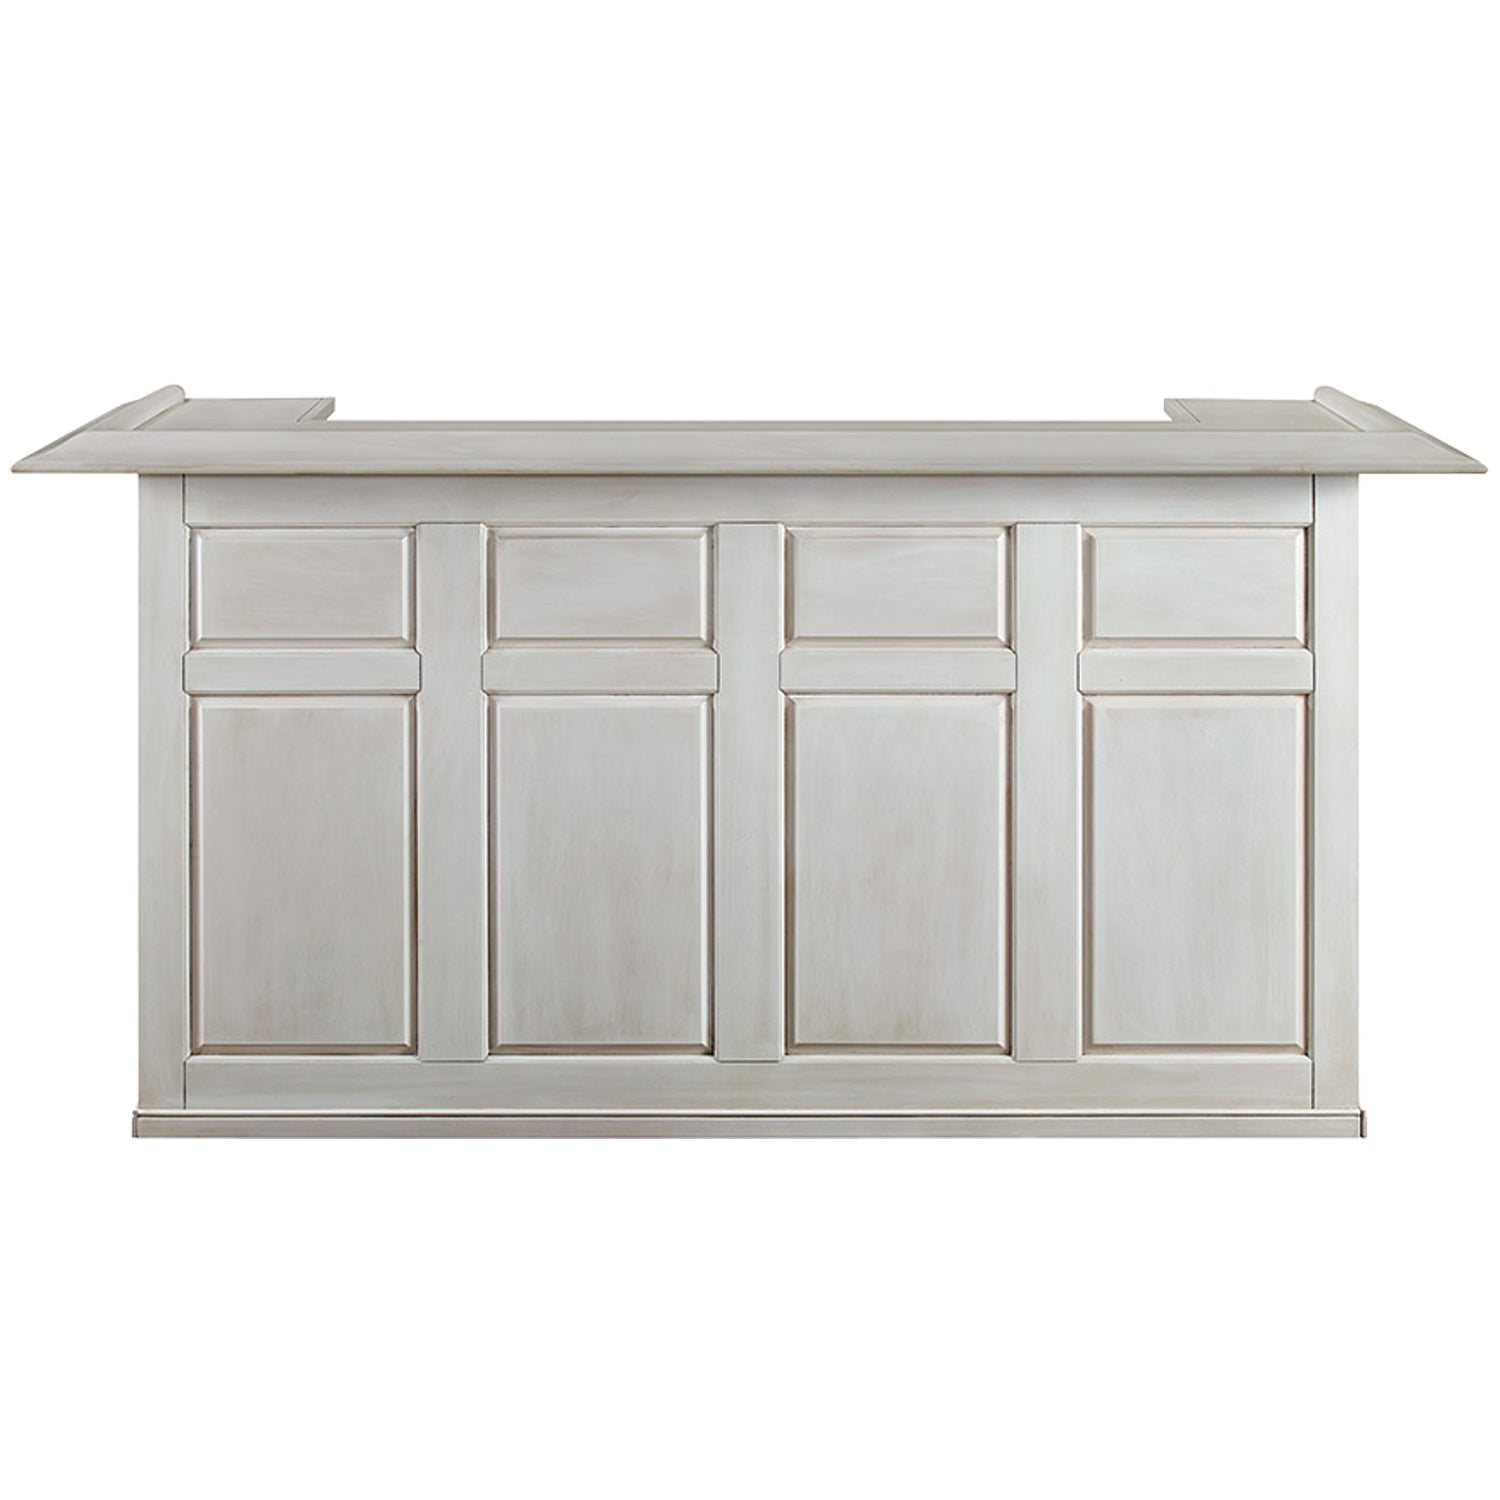 RAM game room DBAR84 ancient white home bar front